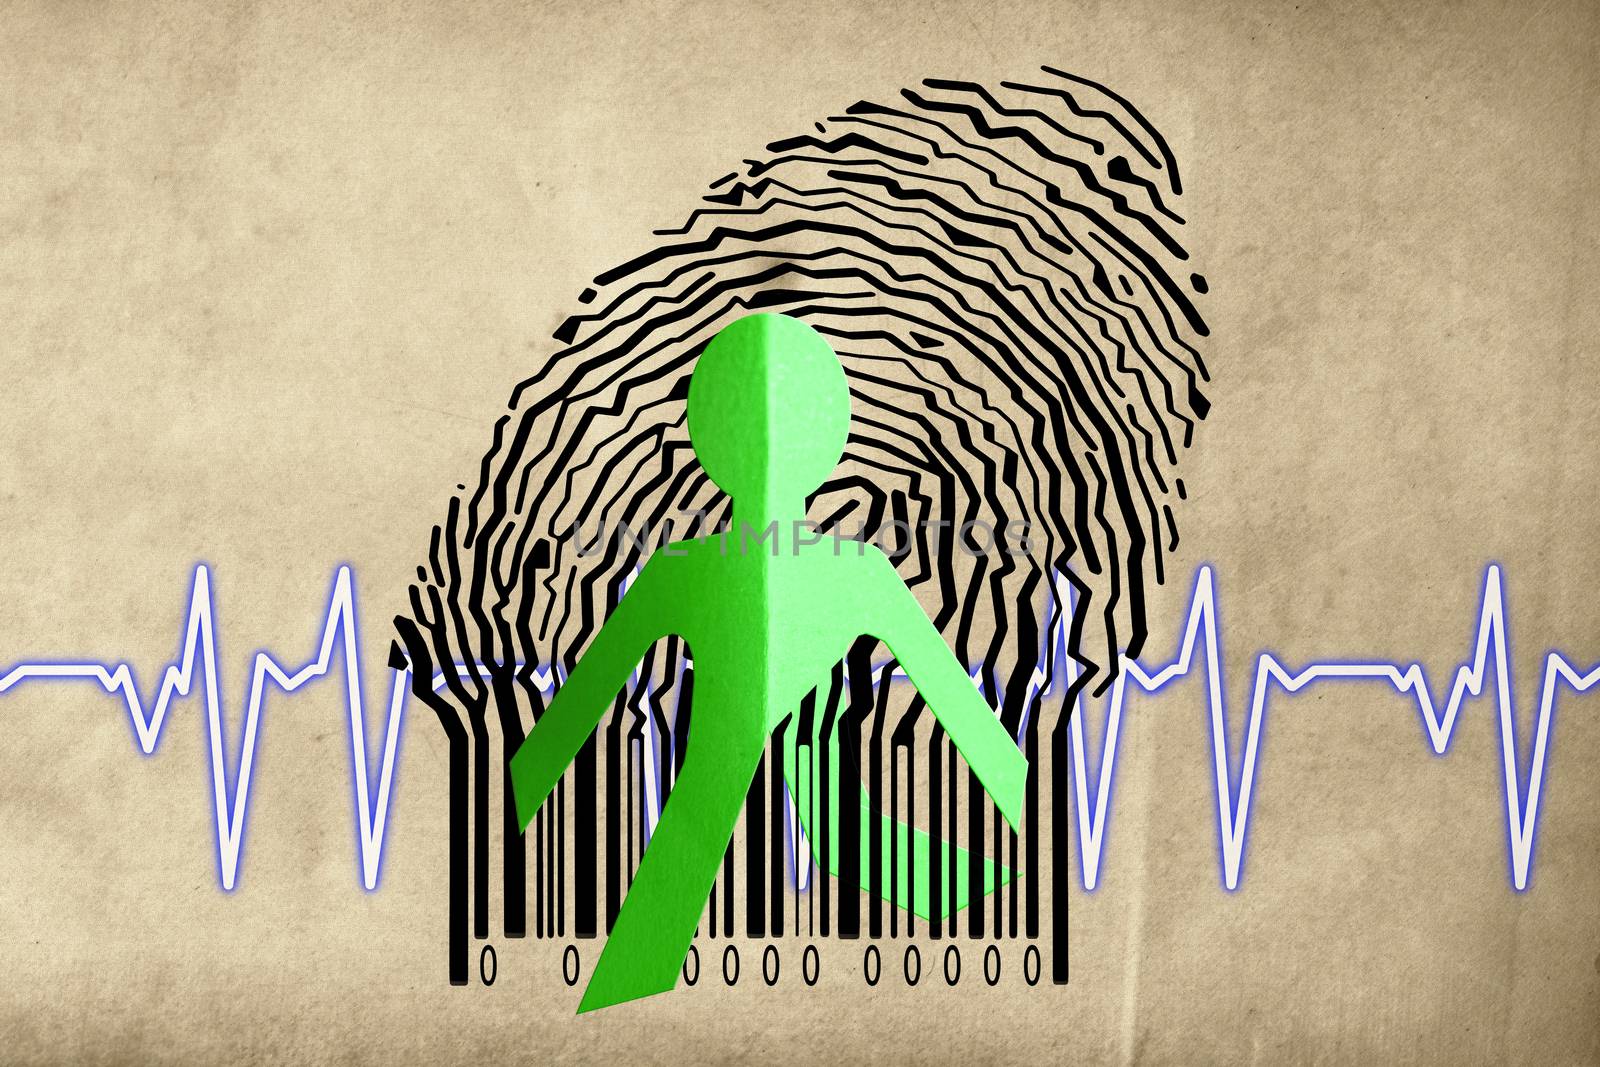 Paperman coming out of a bar code with cardiogram by yands